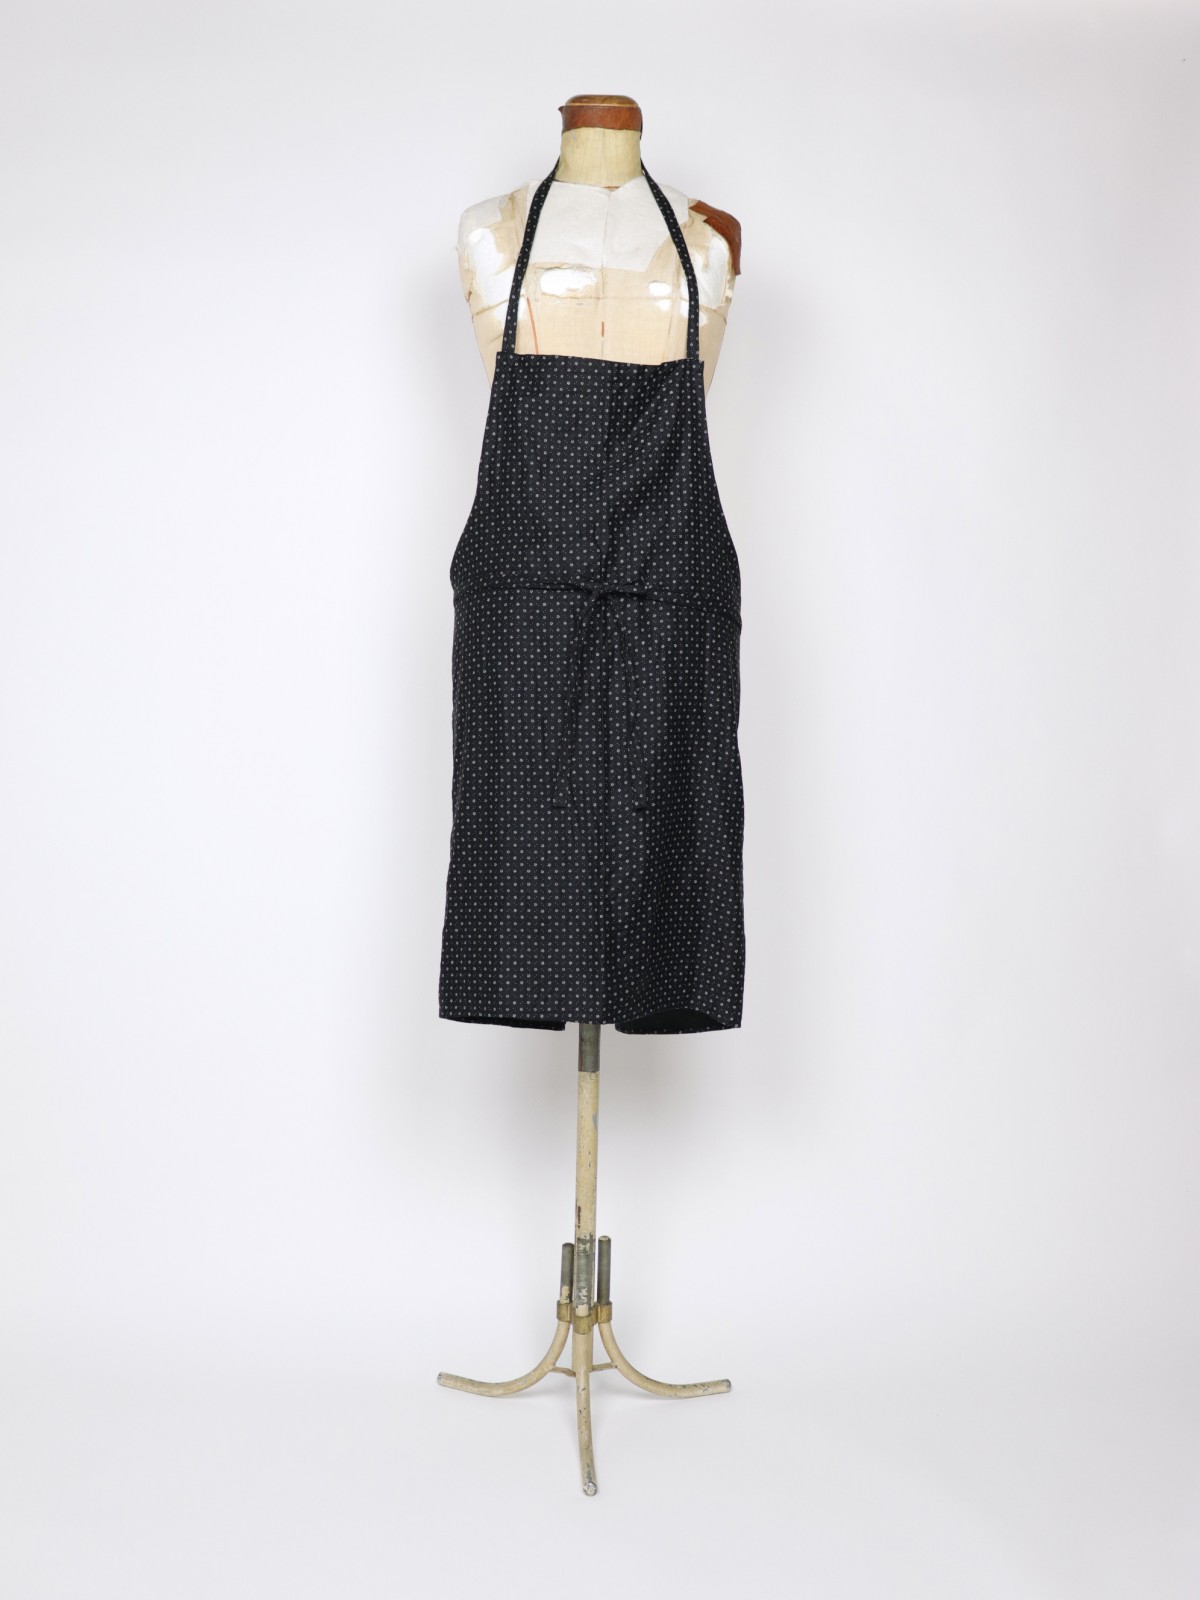 Dead stock french fabric apron, french black printted patern fabric, brown.remake apron